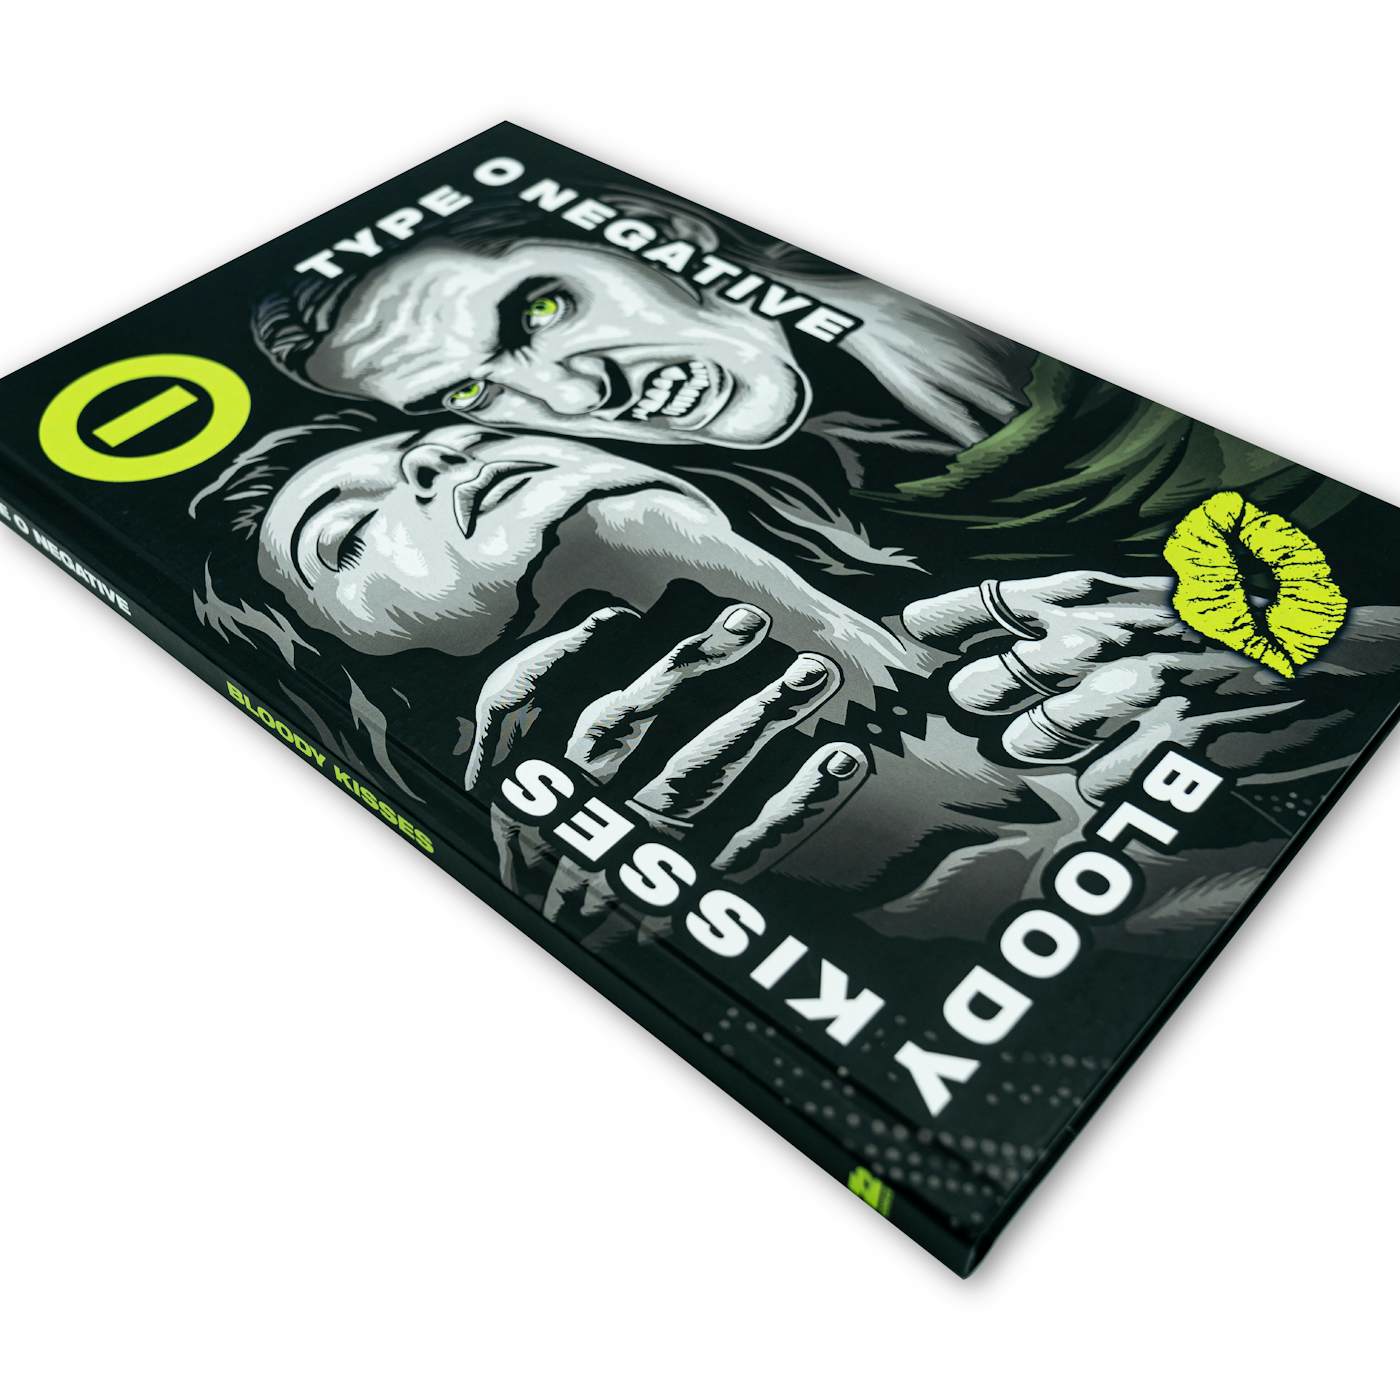 Type O Negative: Bloody Kisses 30 - Deluxe Bundle